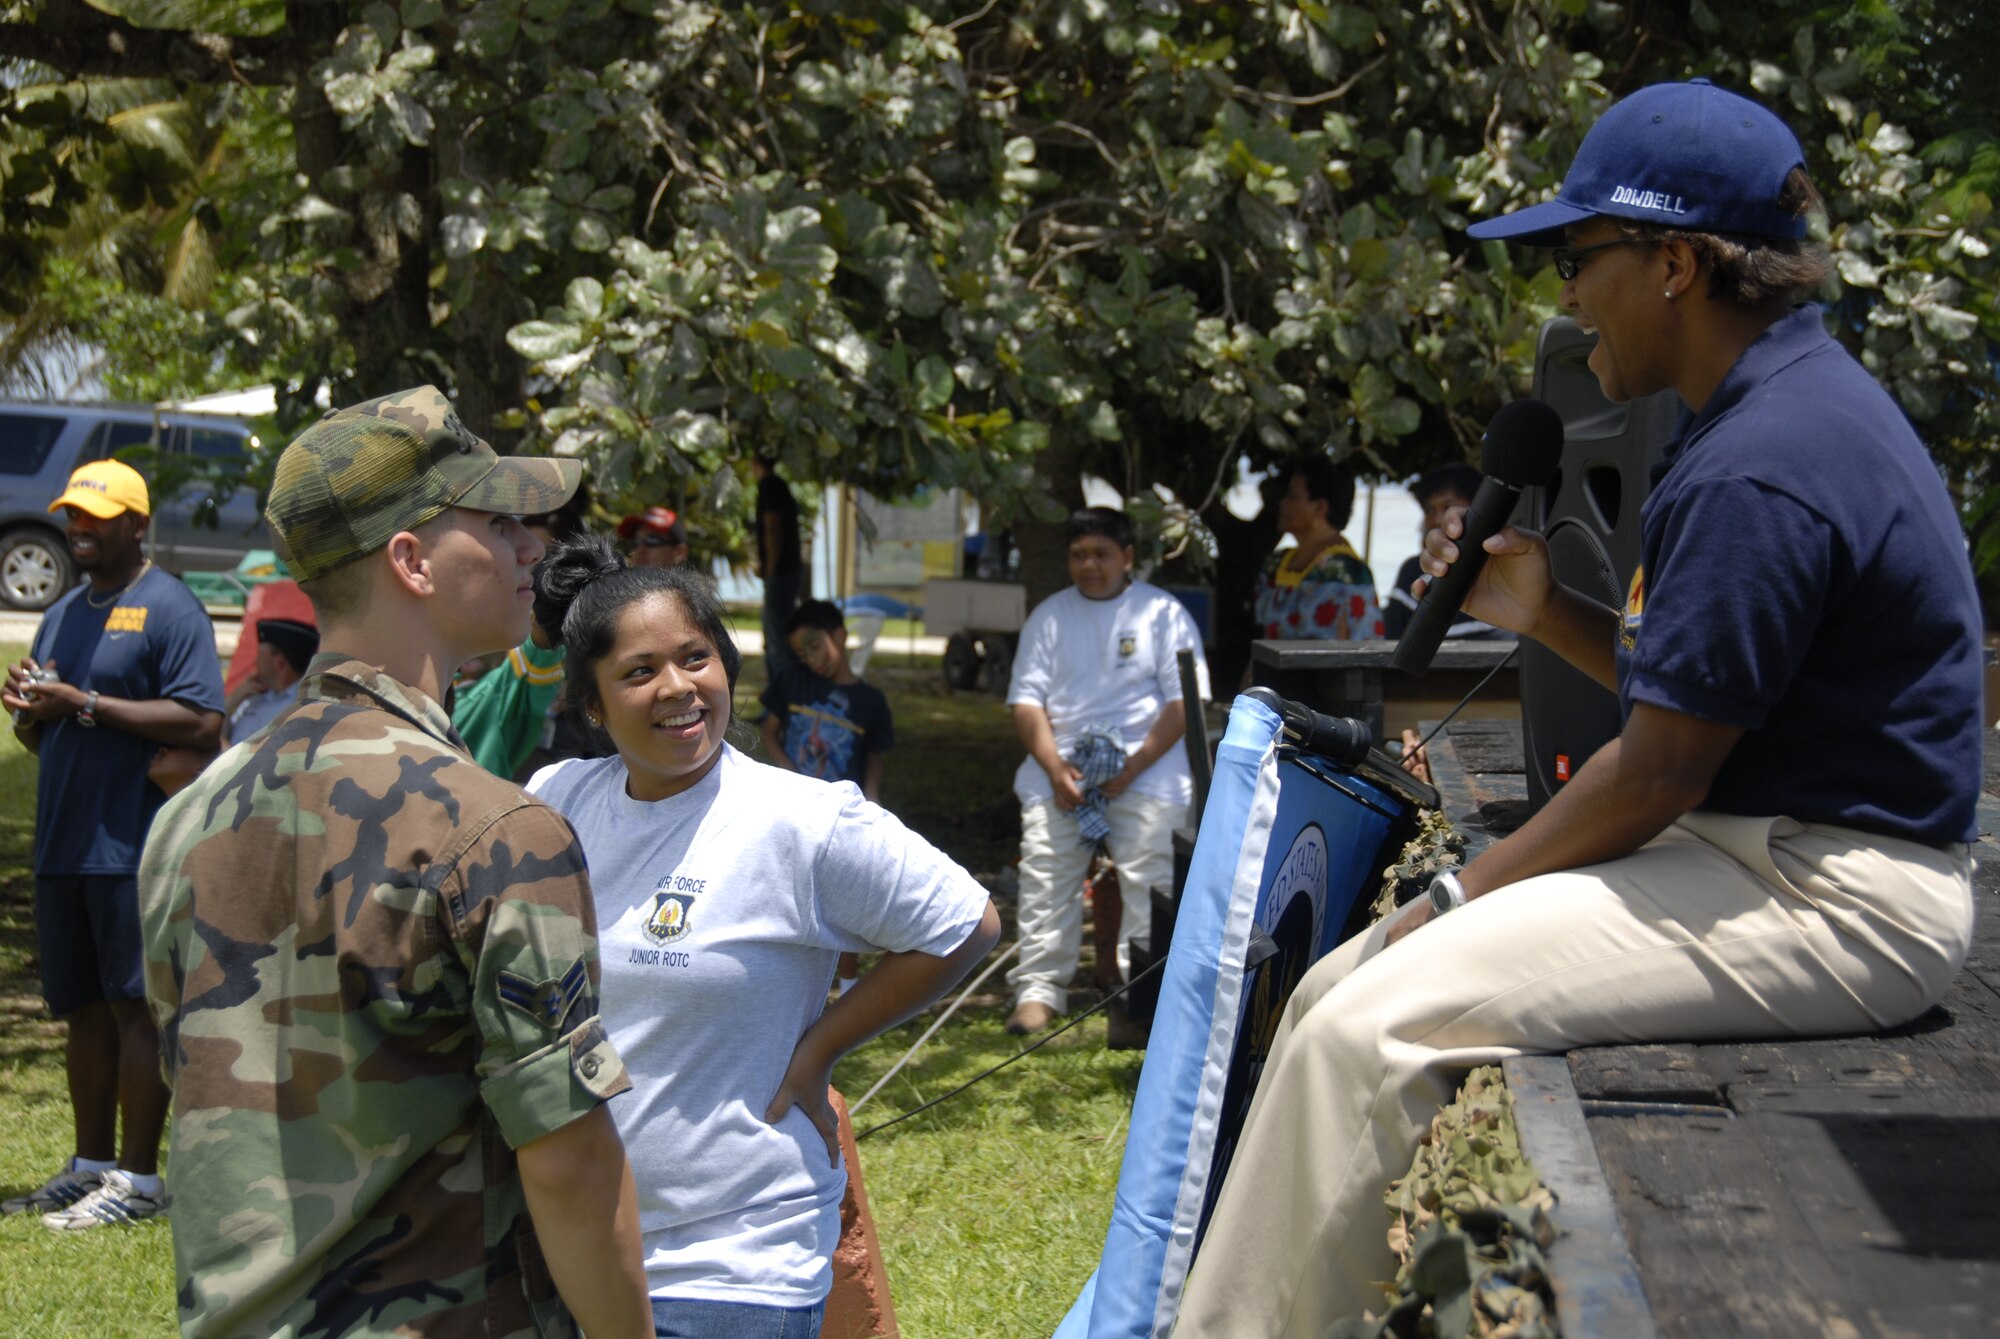 ANDERSEN AIR FORCE BASE GUAM, Maj. Richelle Dowdell, 36th Wing Public Affairs chief, quizzes people on the Air Force history during the Air Force demonstration Sept. 8 at Ypao Beach Park. (U.S. Air Force Photo by Airman First Class Daniel Owen)